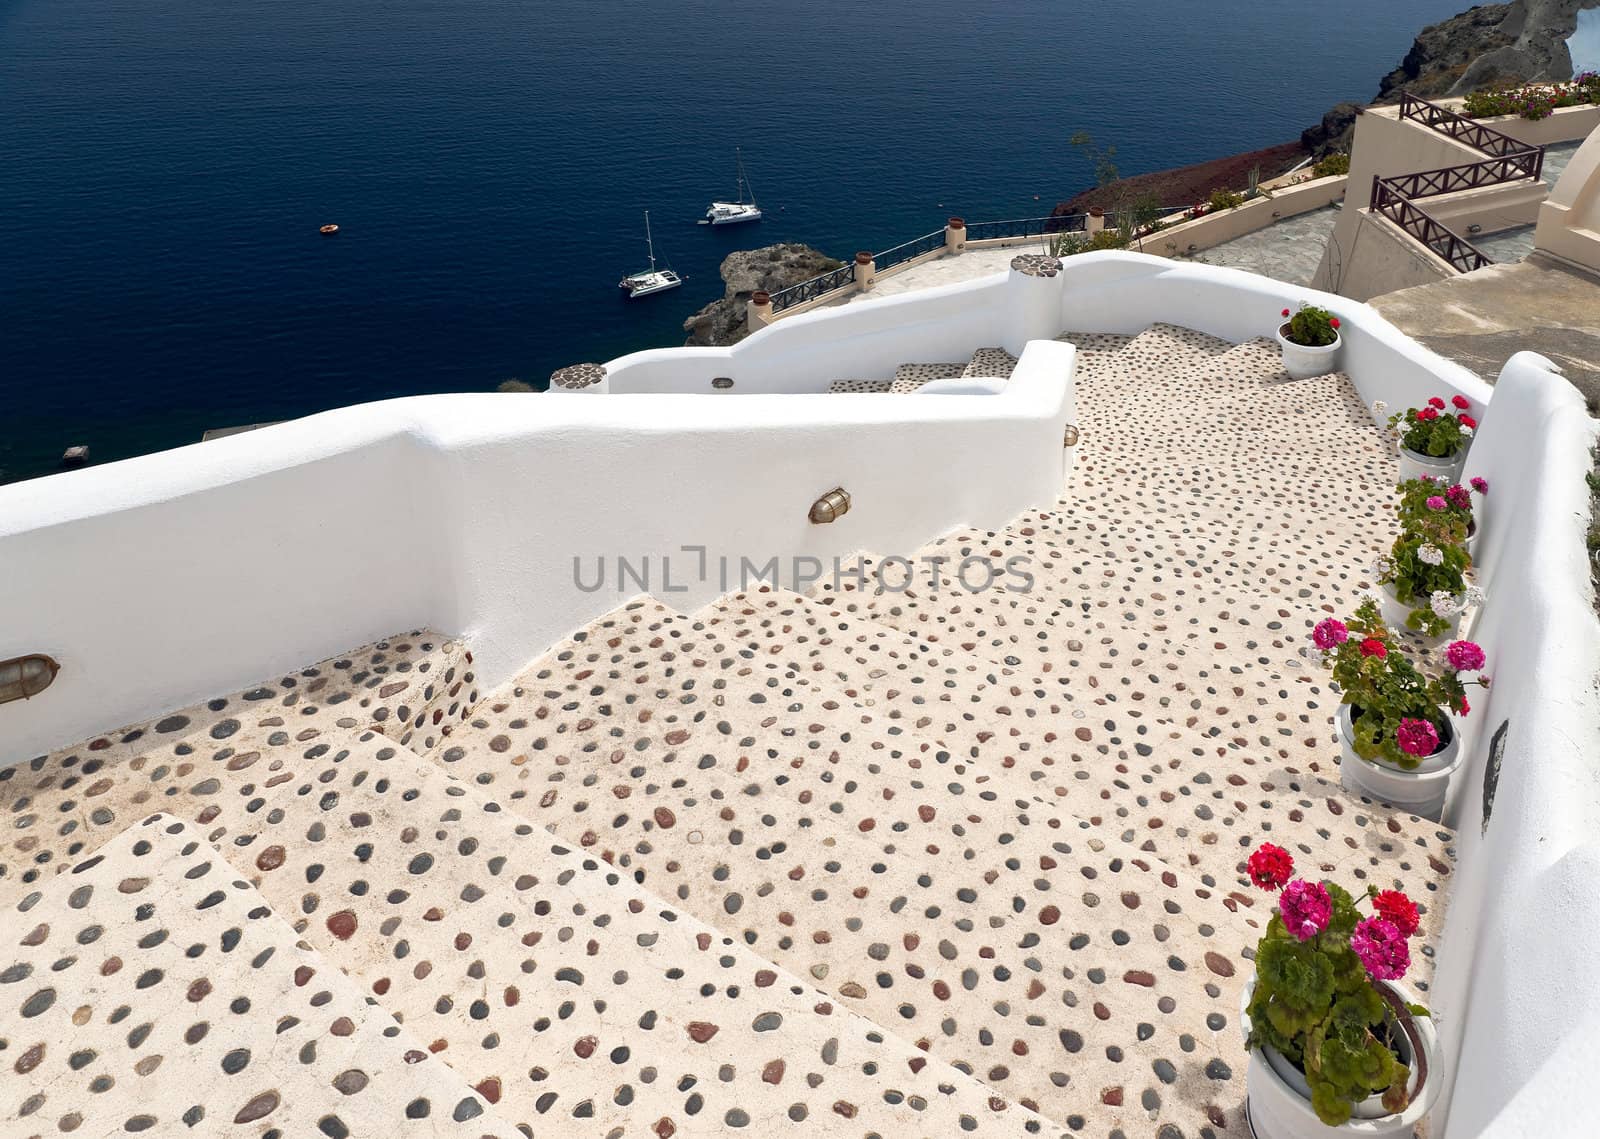 Sea view in Santorini island with leopard staircase to the buildings on the cliff